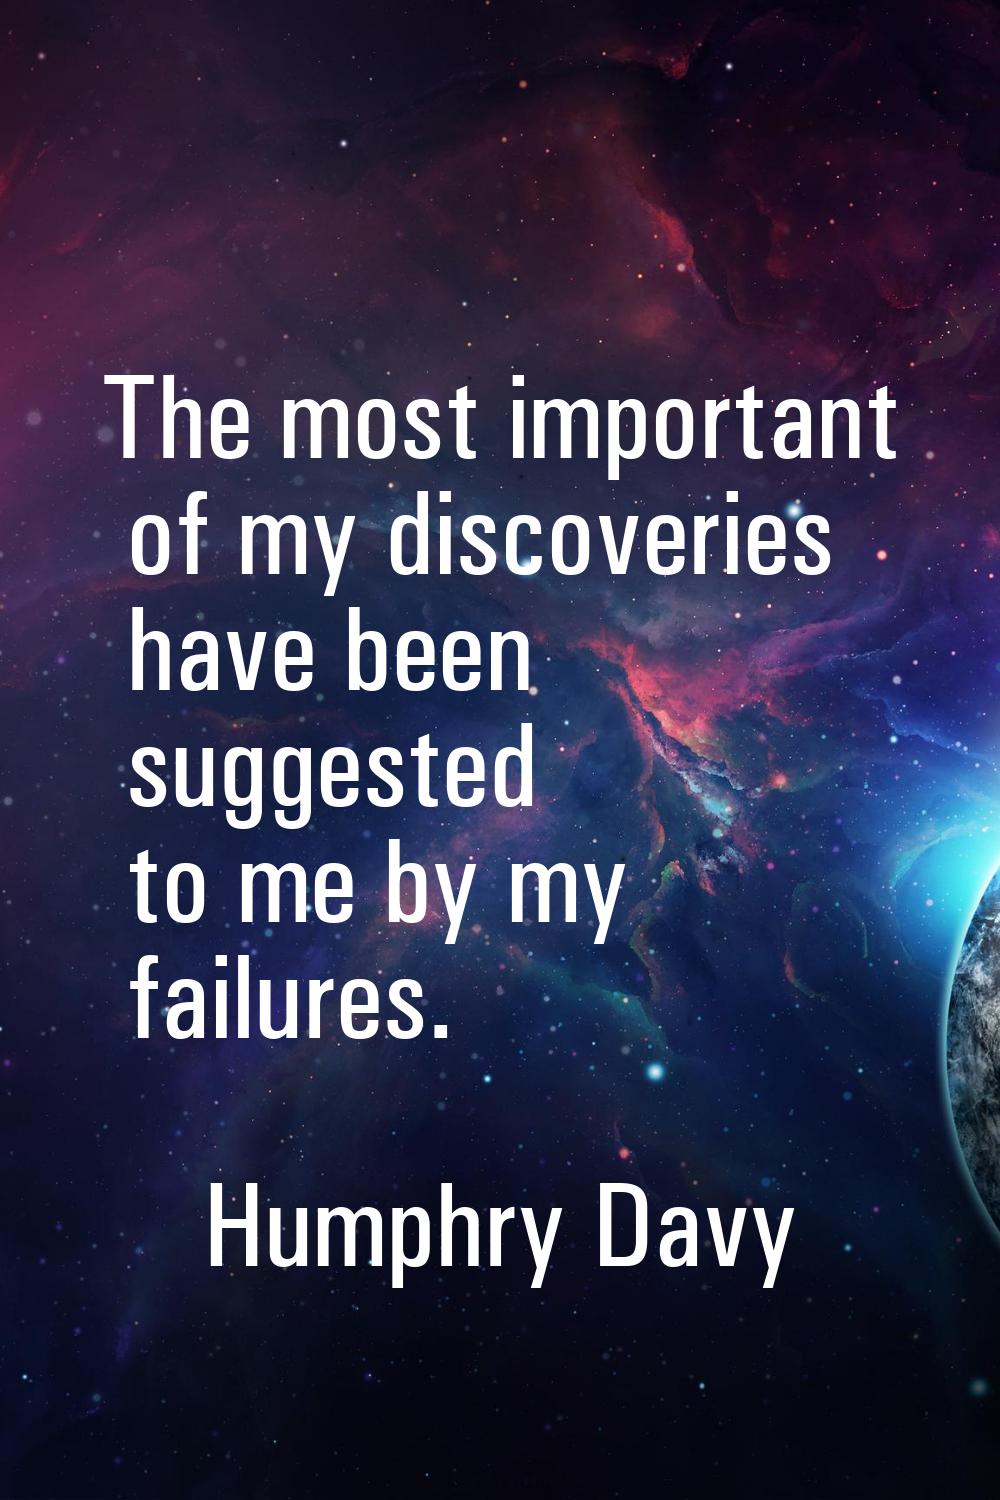 The most important of my discoveries have been suggested to me by my failures.